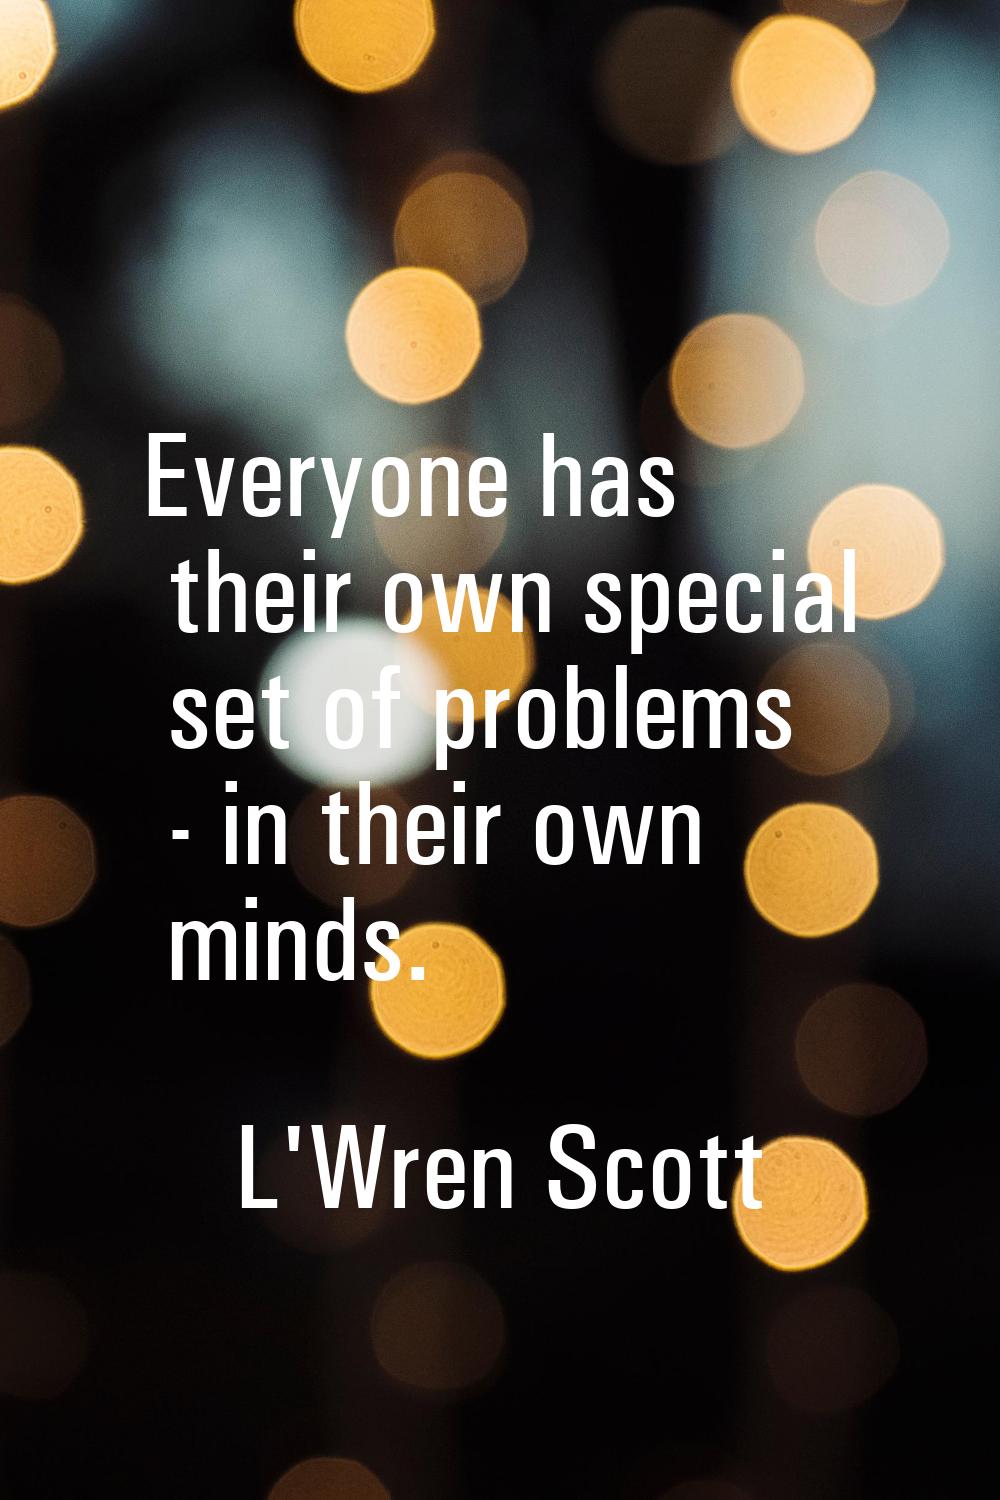 Everyone has their own special set of problems - in their own minds.